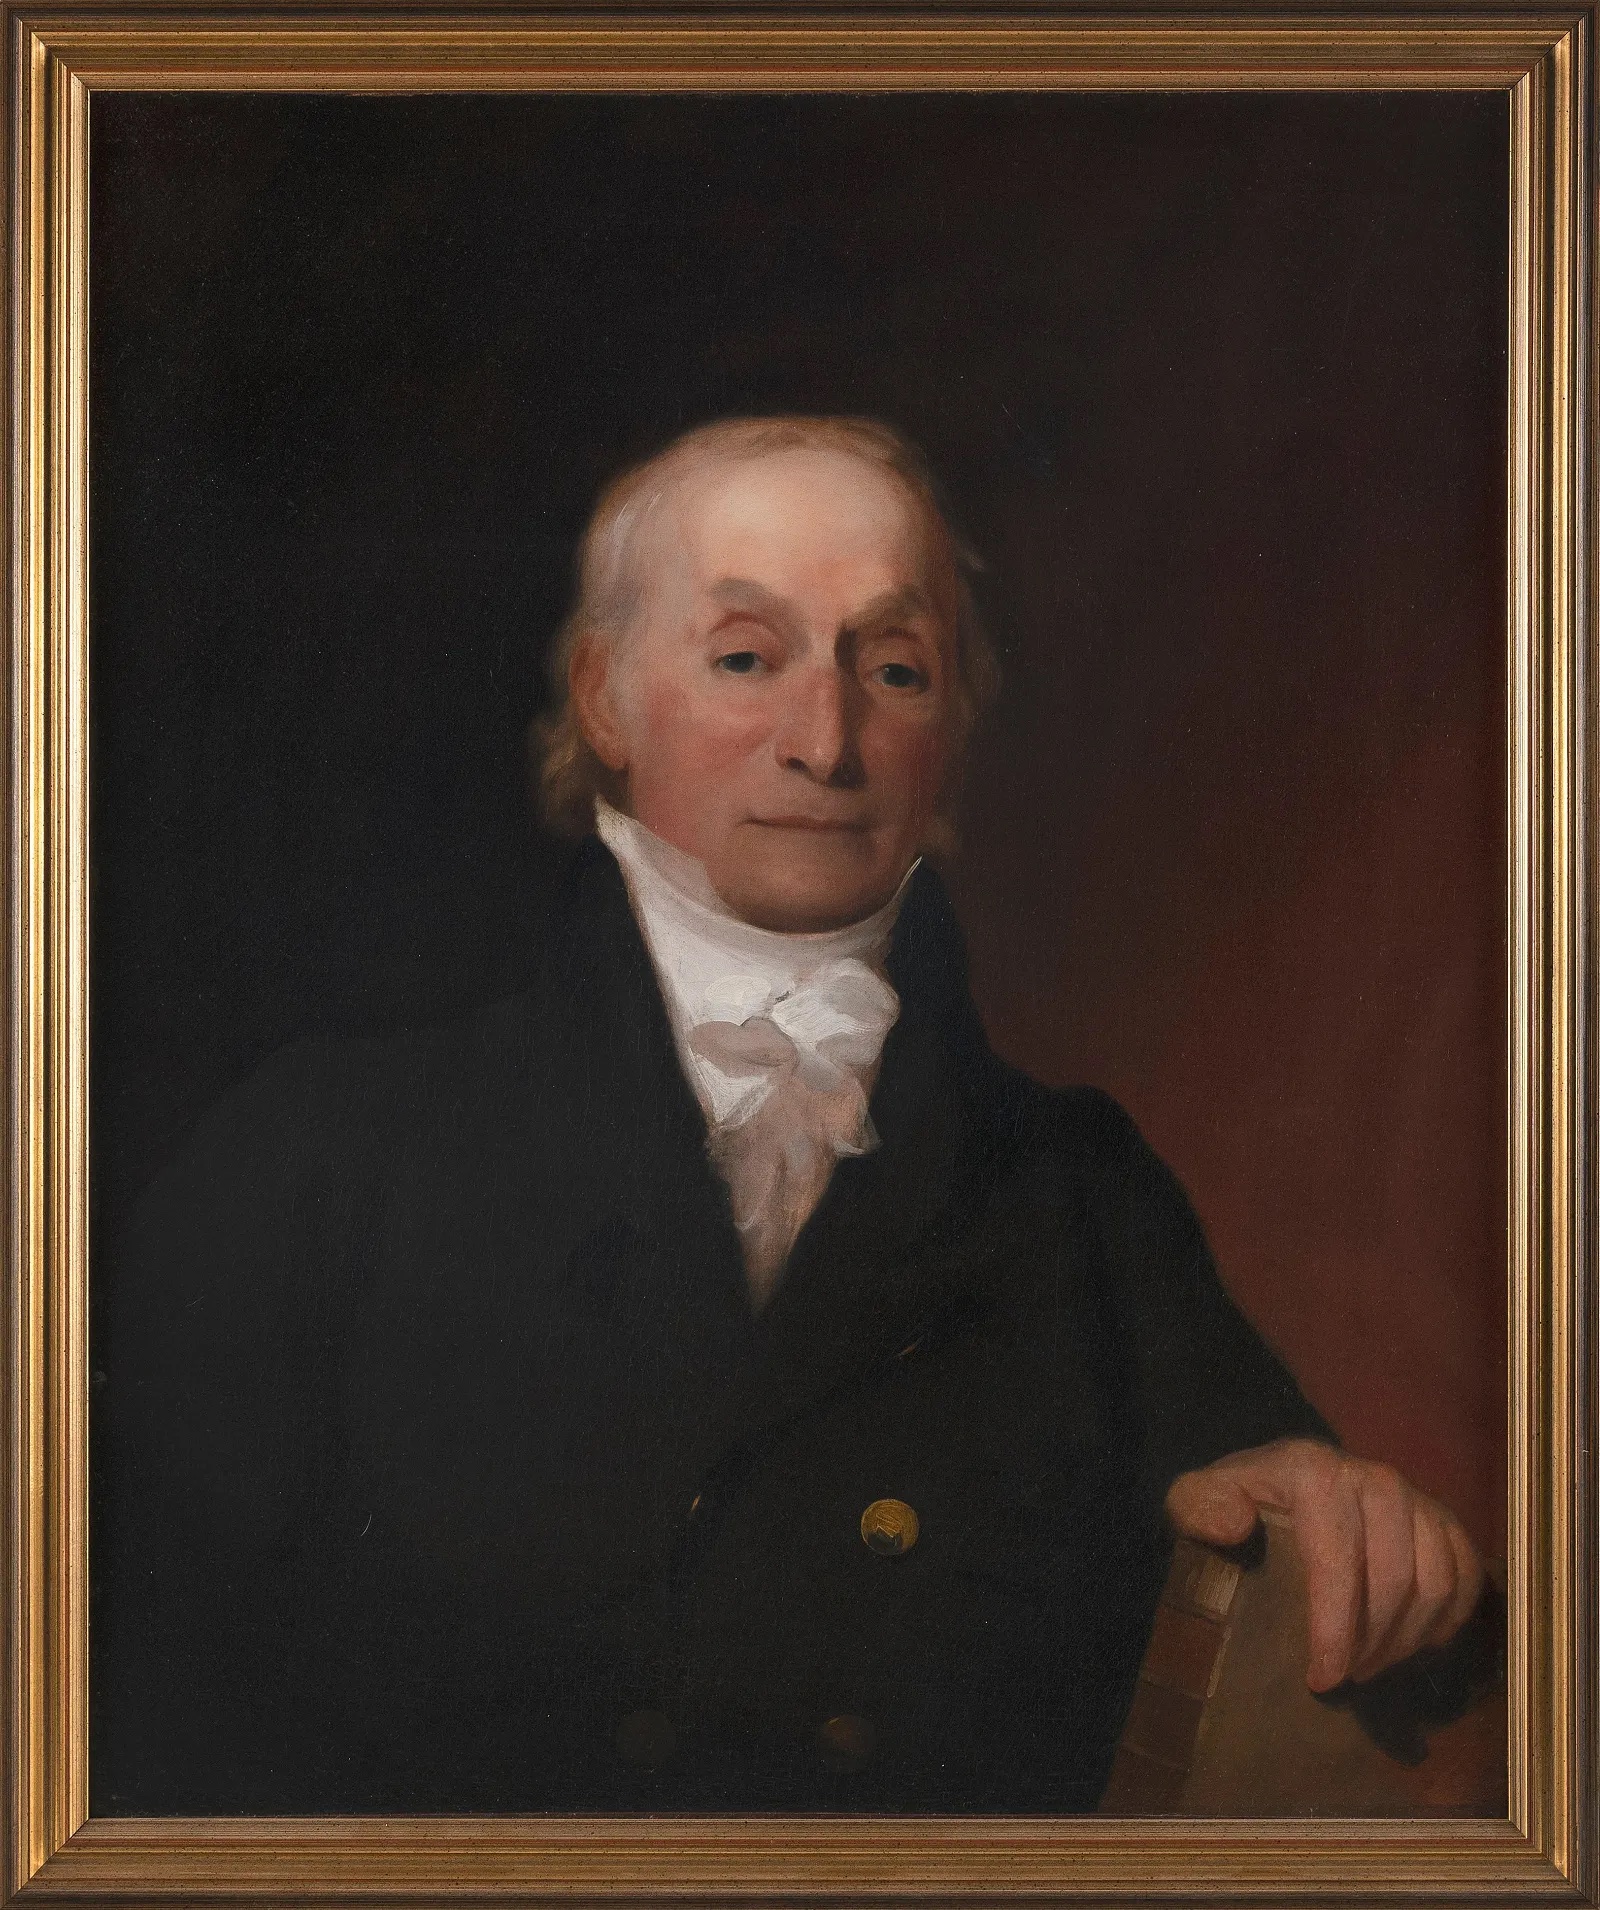 Thomas Sully, portrait of West Point professor Jared Mansfield, estimated at $15,000-$25,000 at Eldred's.